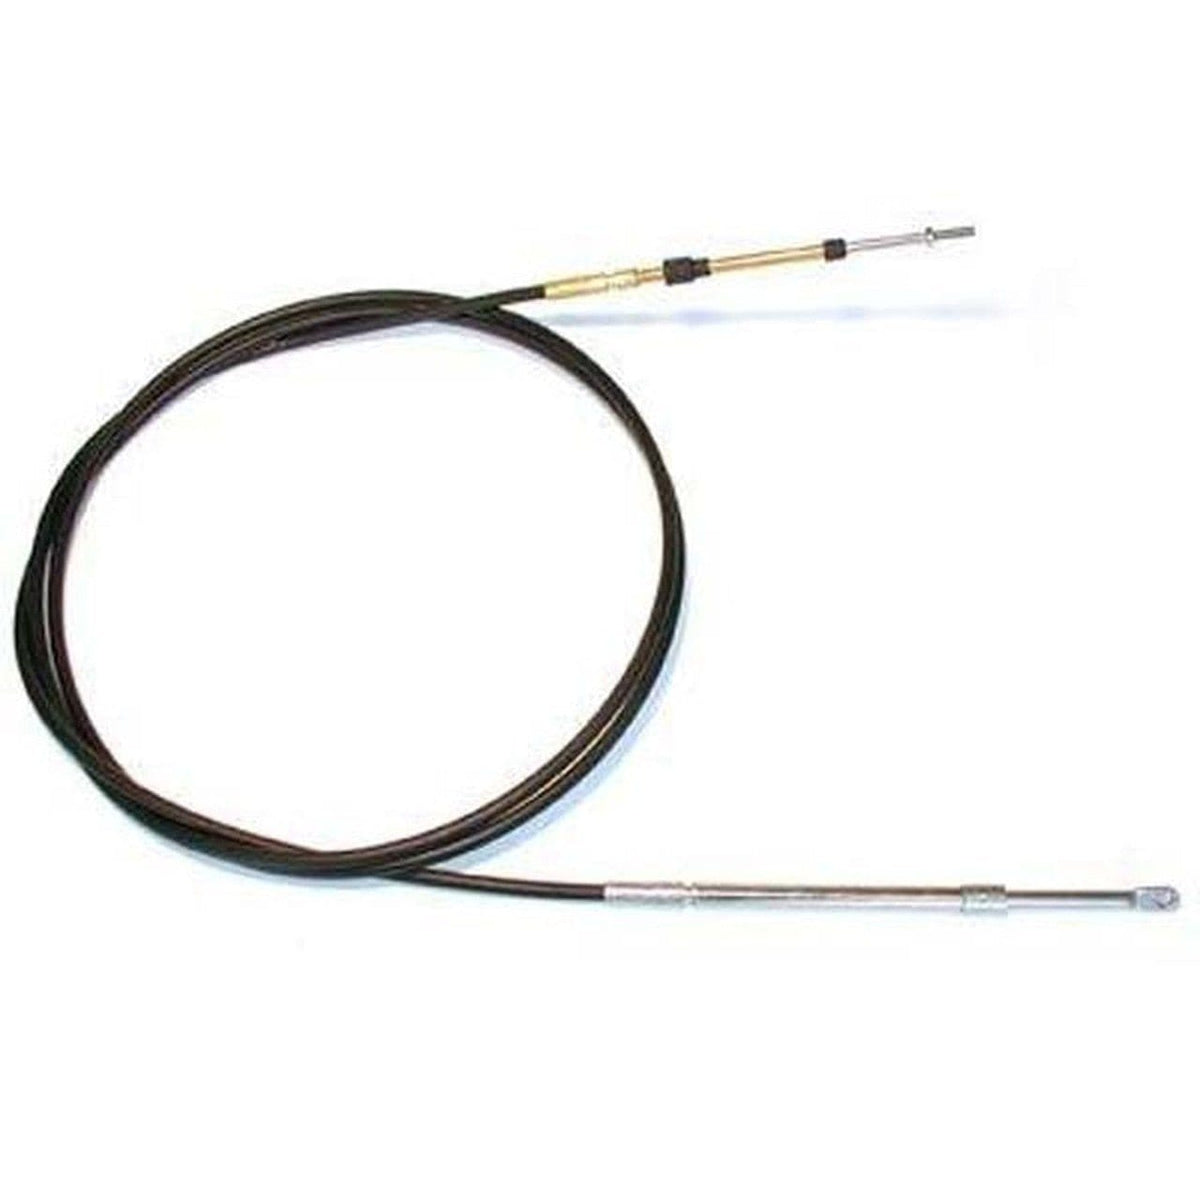 Teleflex Not Qualified for Free Shipping Teleflex 12' Gate Control Cable #CC21312